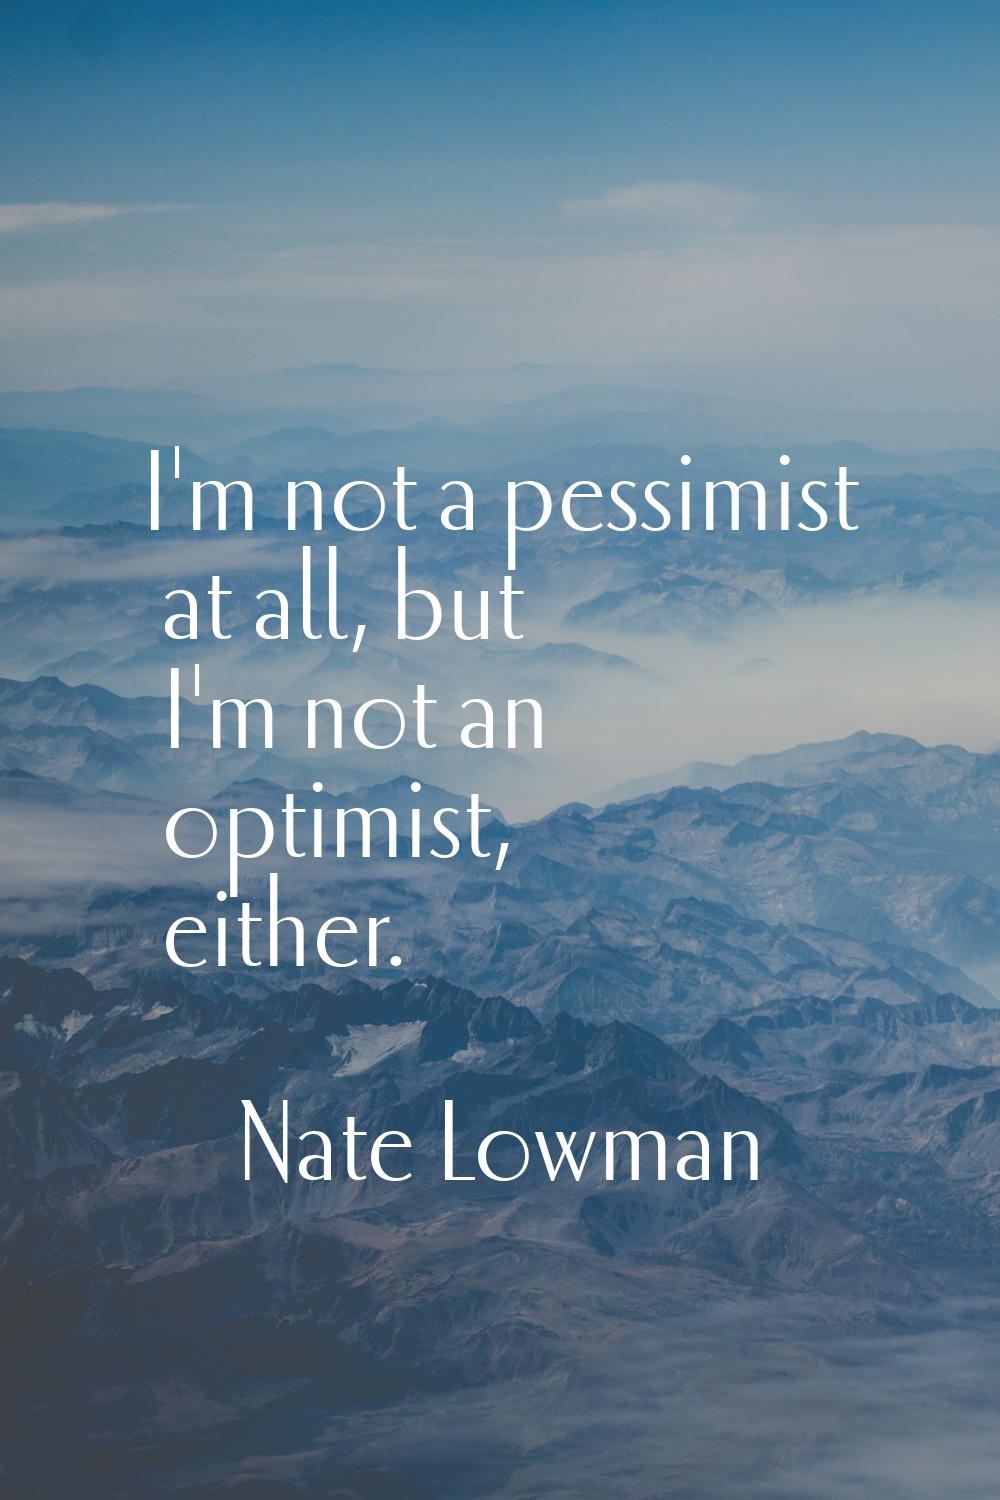 I'm not a pessimist at all, but I'm not an optimist, either.